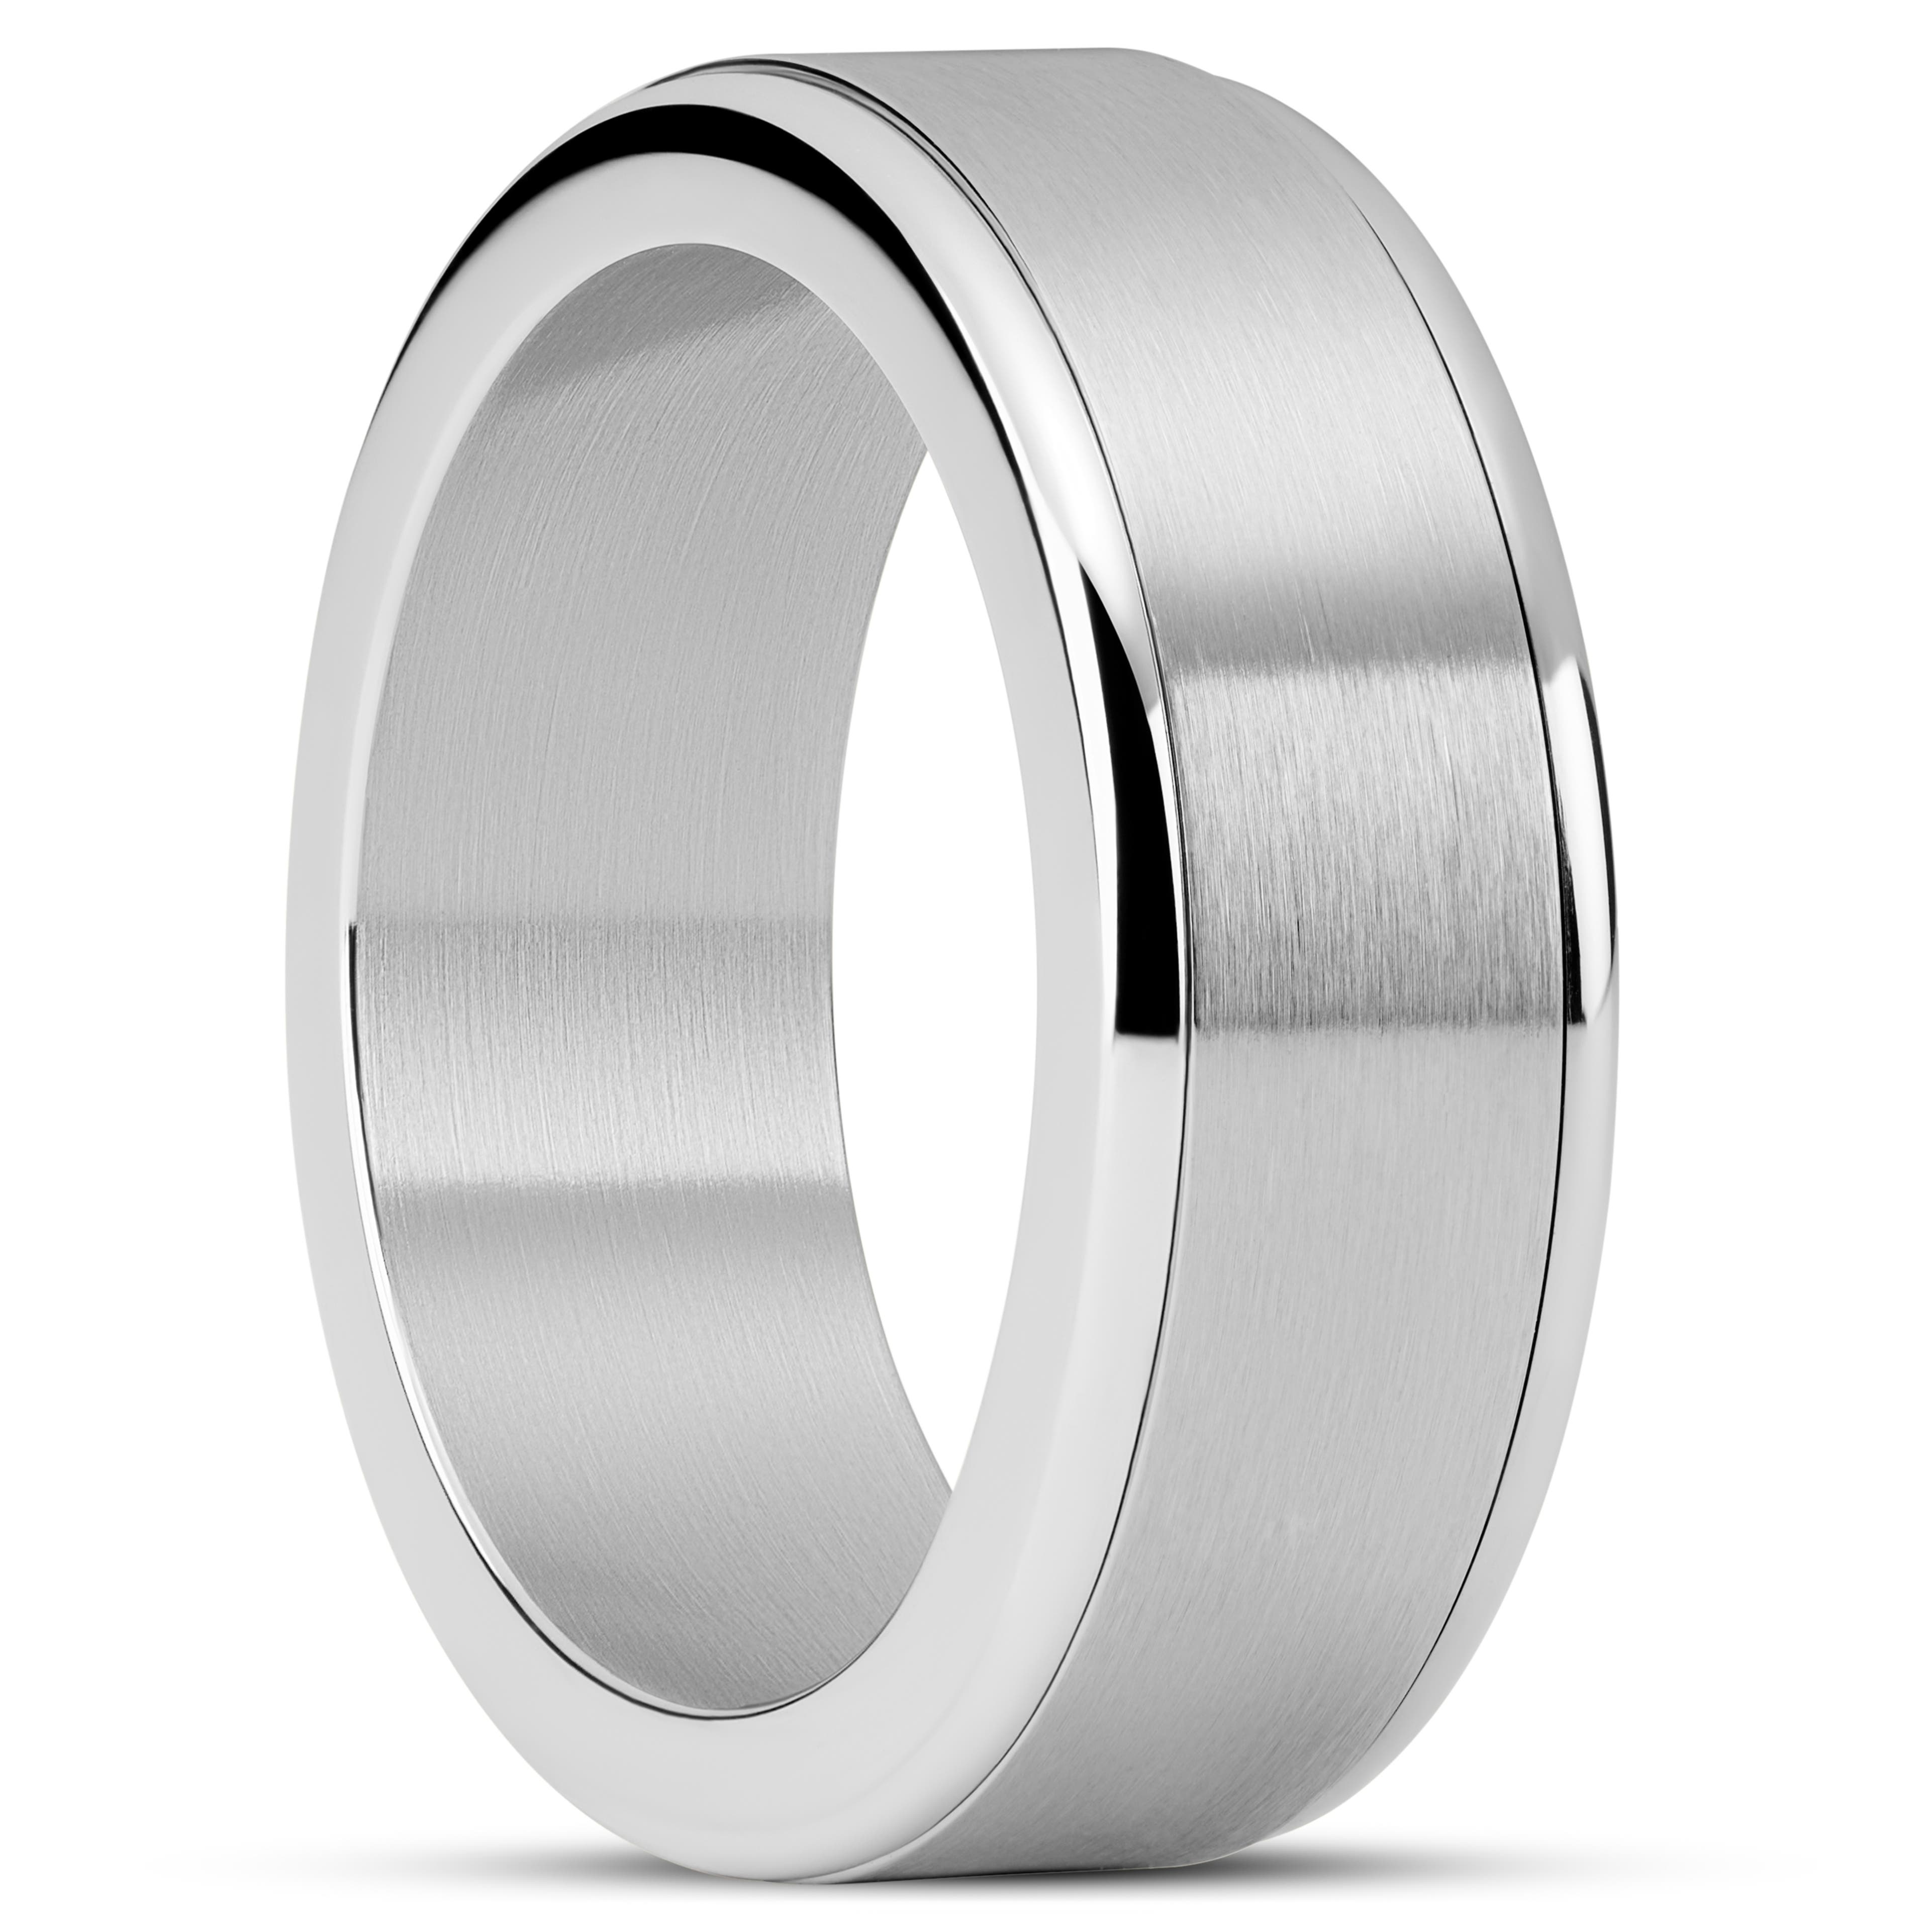 Enthumema | 8 mm Brushed Silver-tone Stainless Steel Fidget Ring